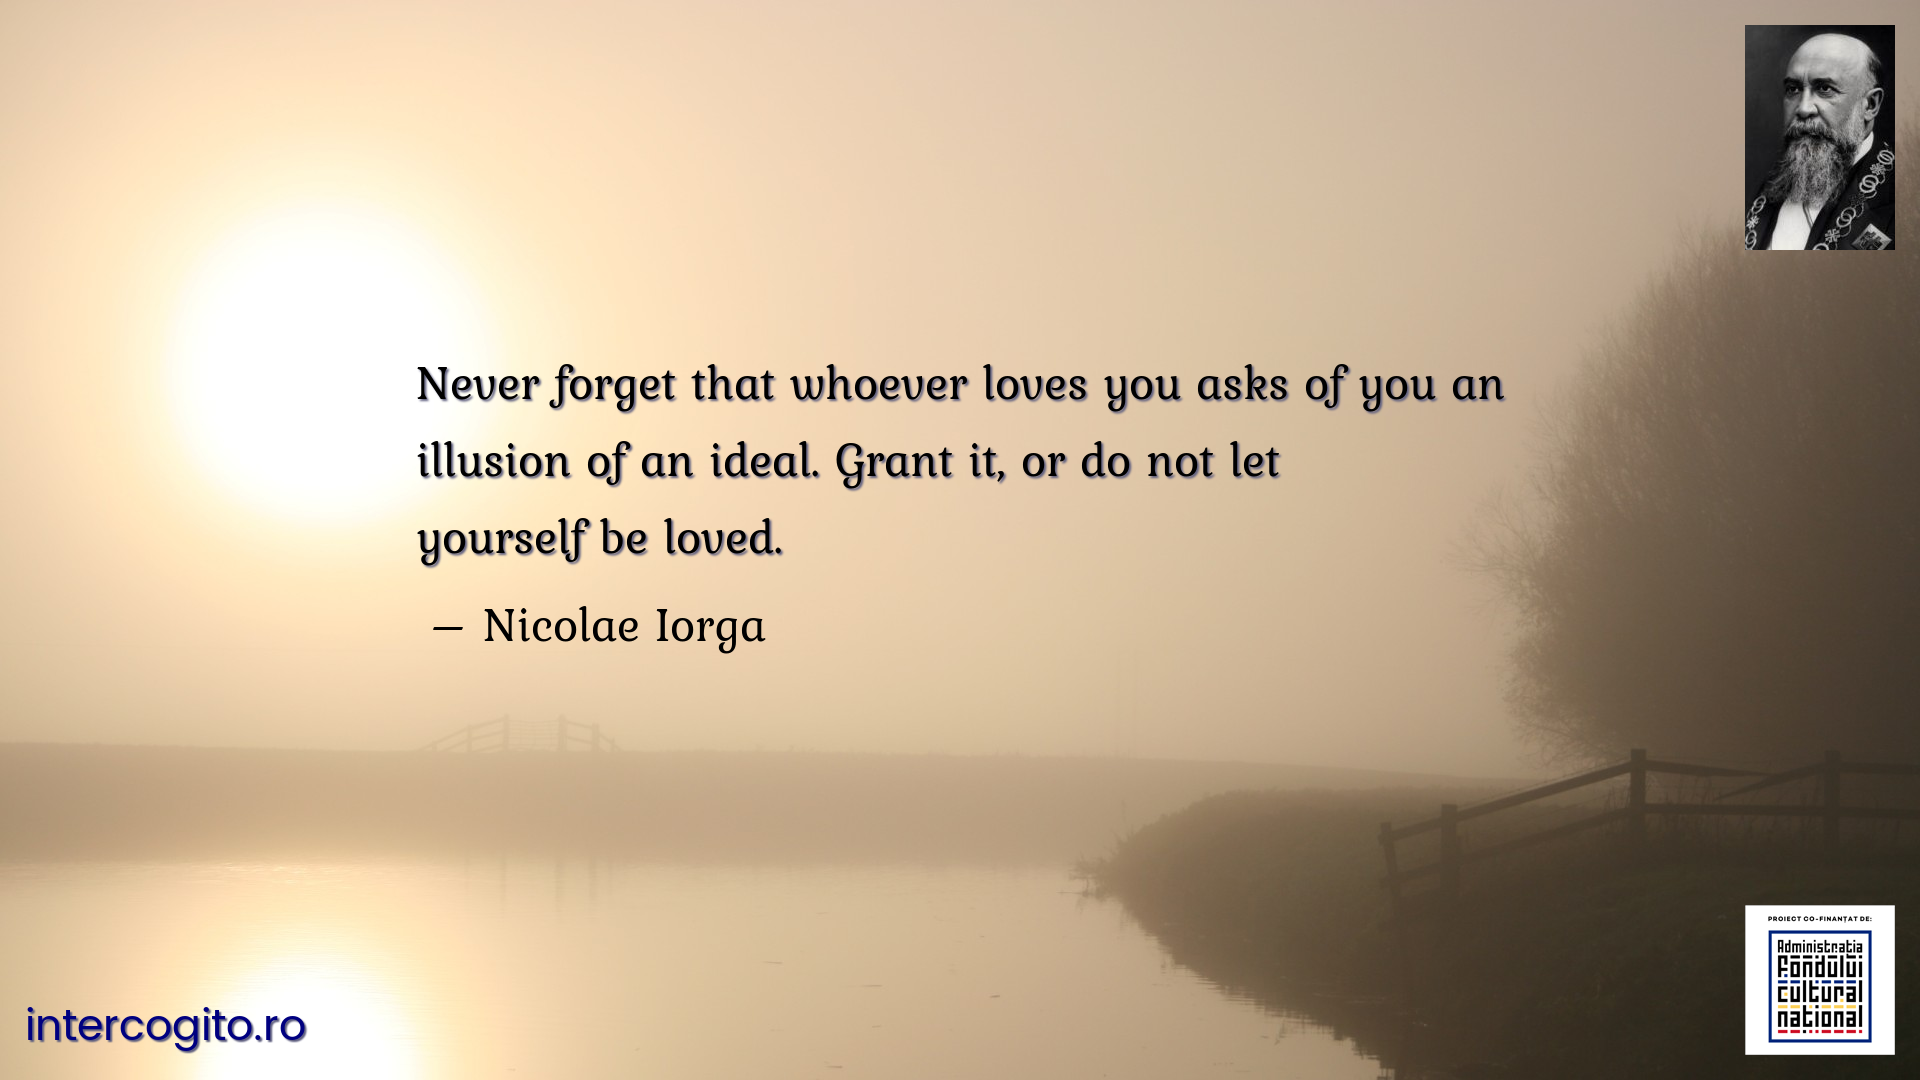 Never forget that whoever loves you asks of you an illusion of an ideal. Grant it, or do not let yourself be loved.